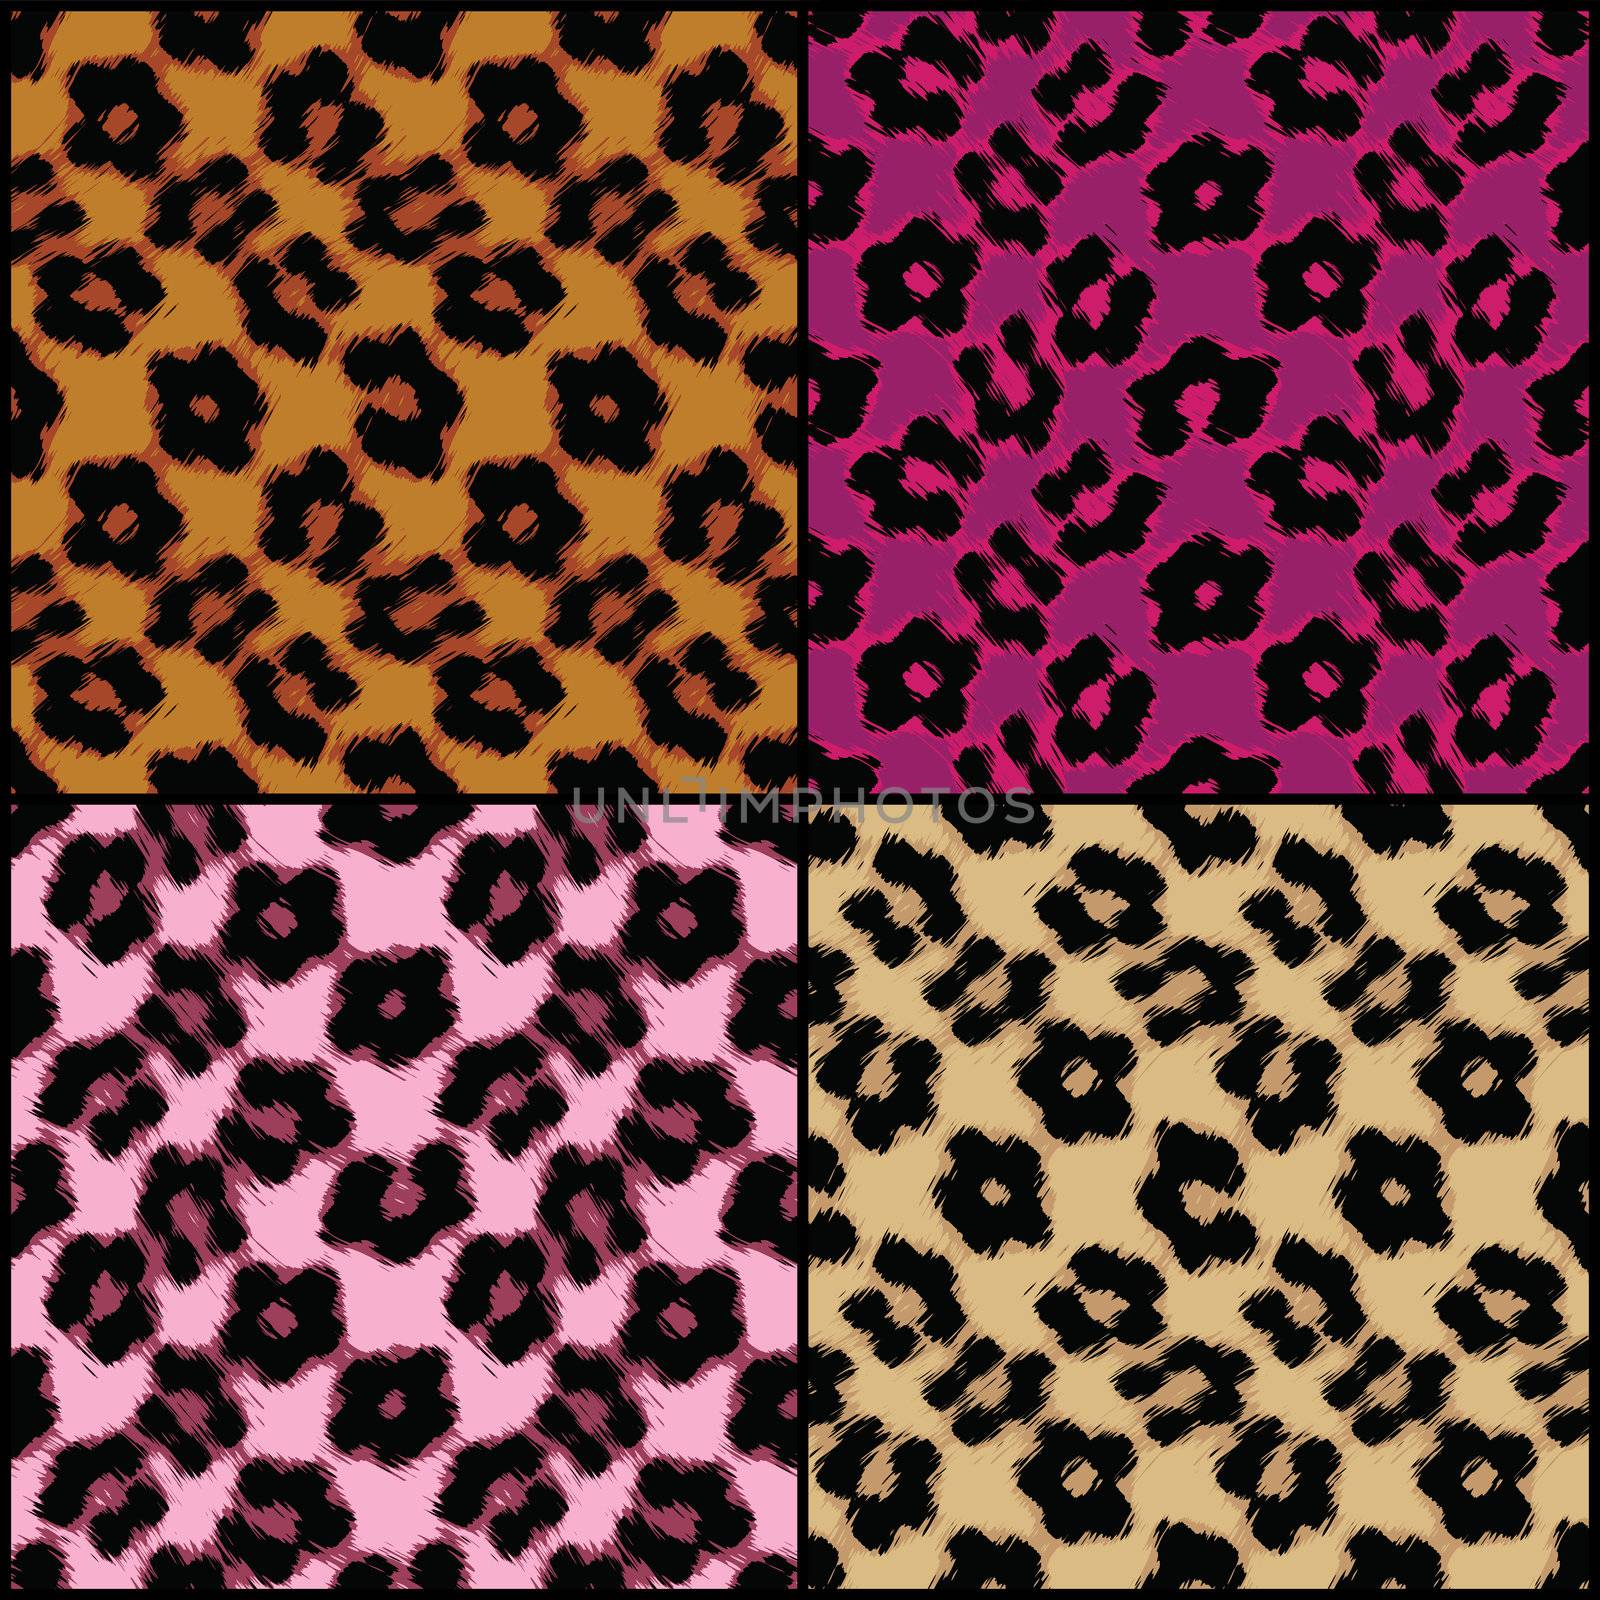 Leopard Print Tiles by graficallyminded